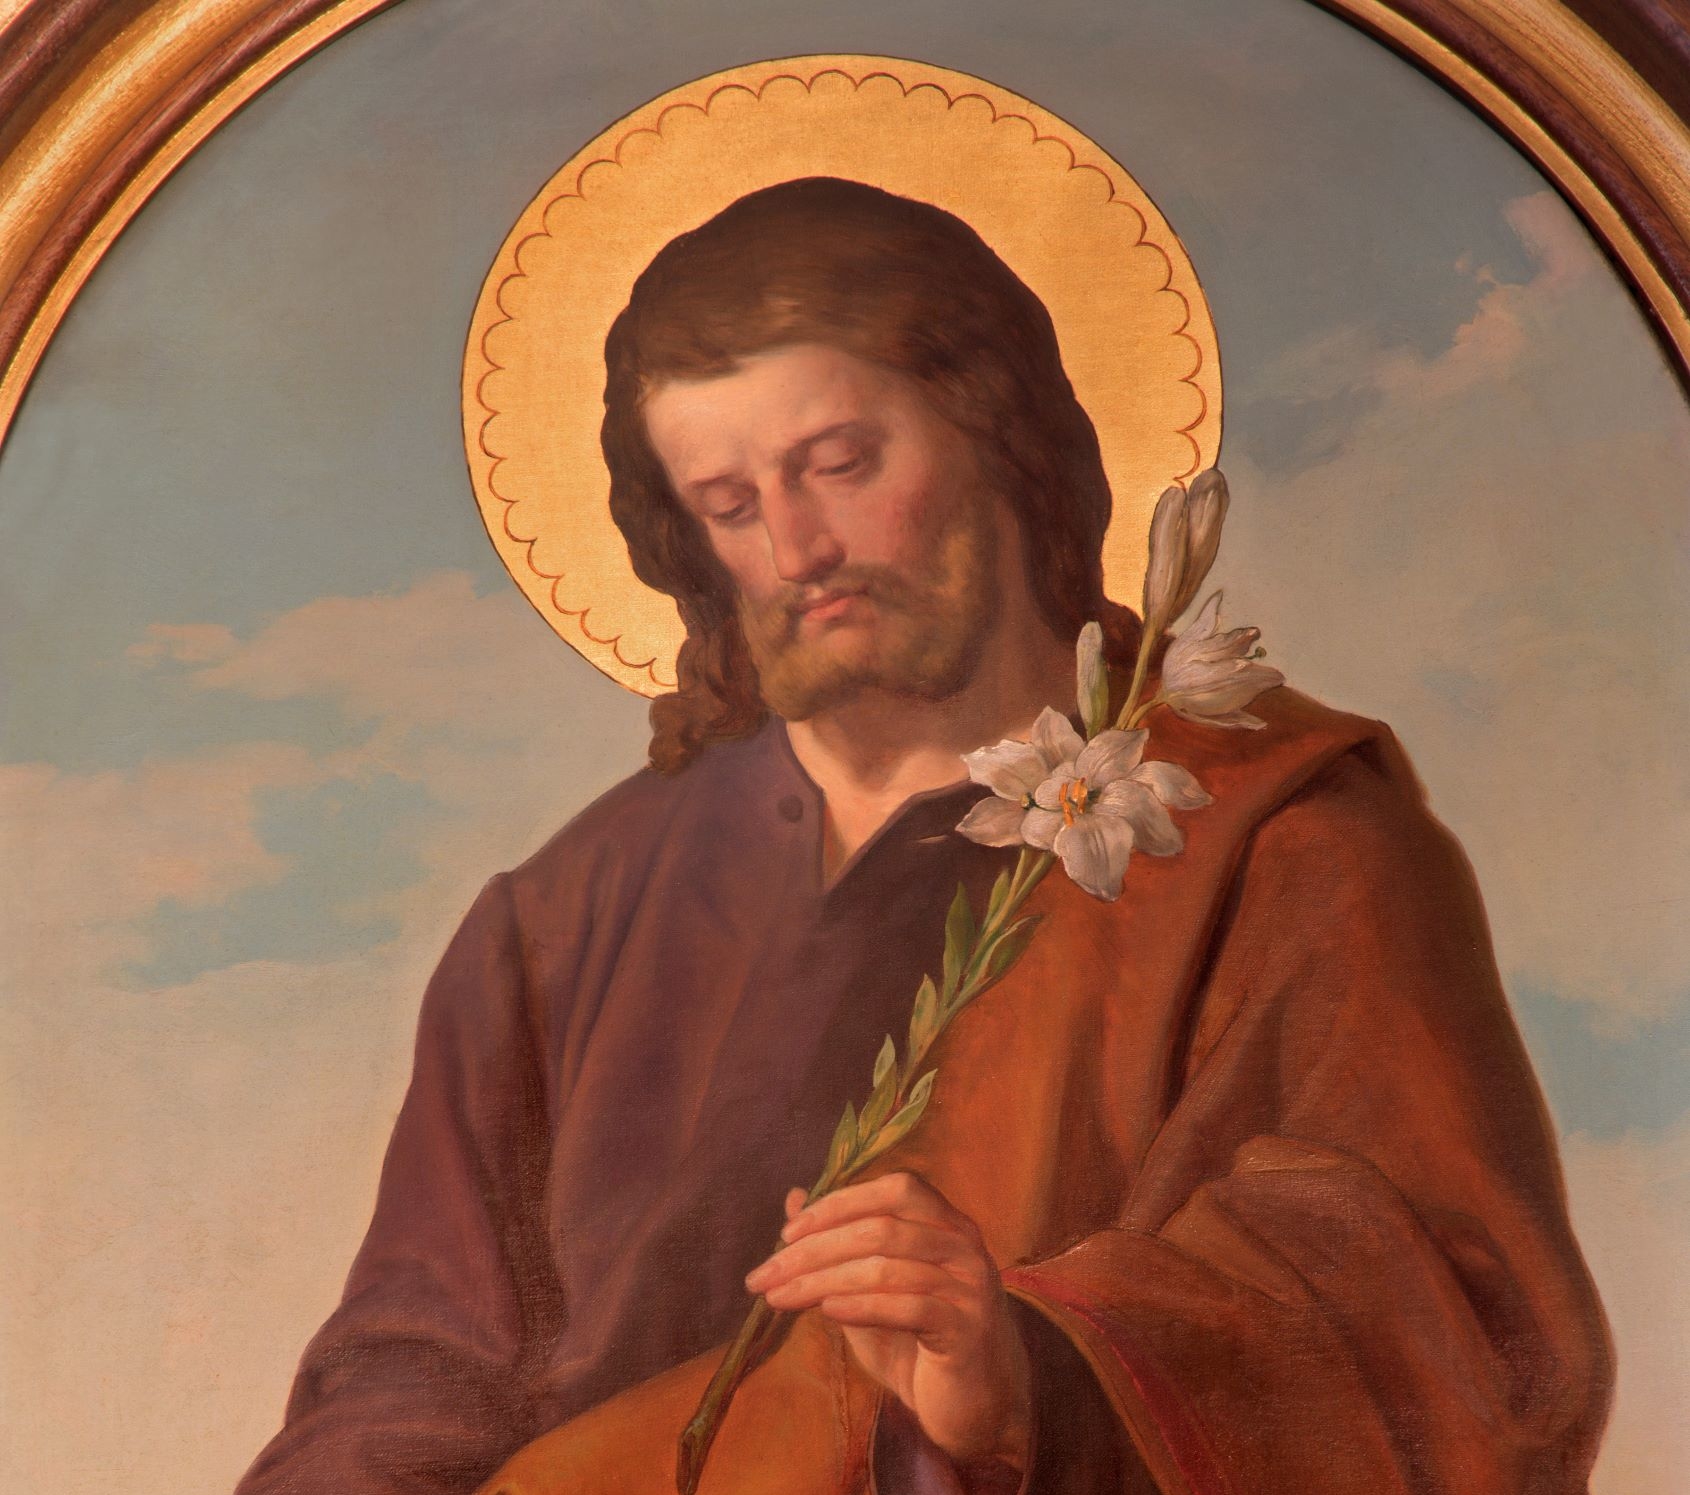 St Joseph's Day Mass (streamed) - Brentwood Diocese